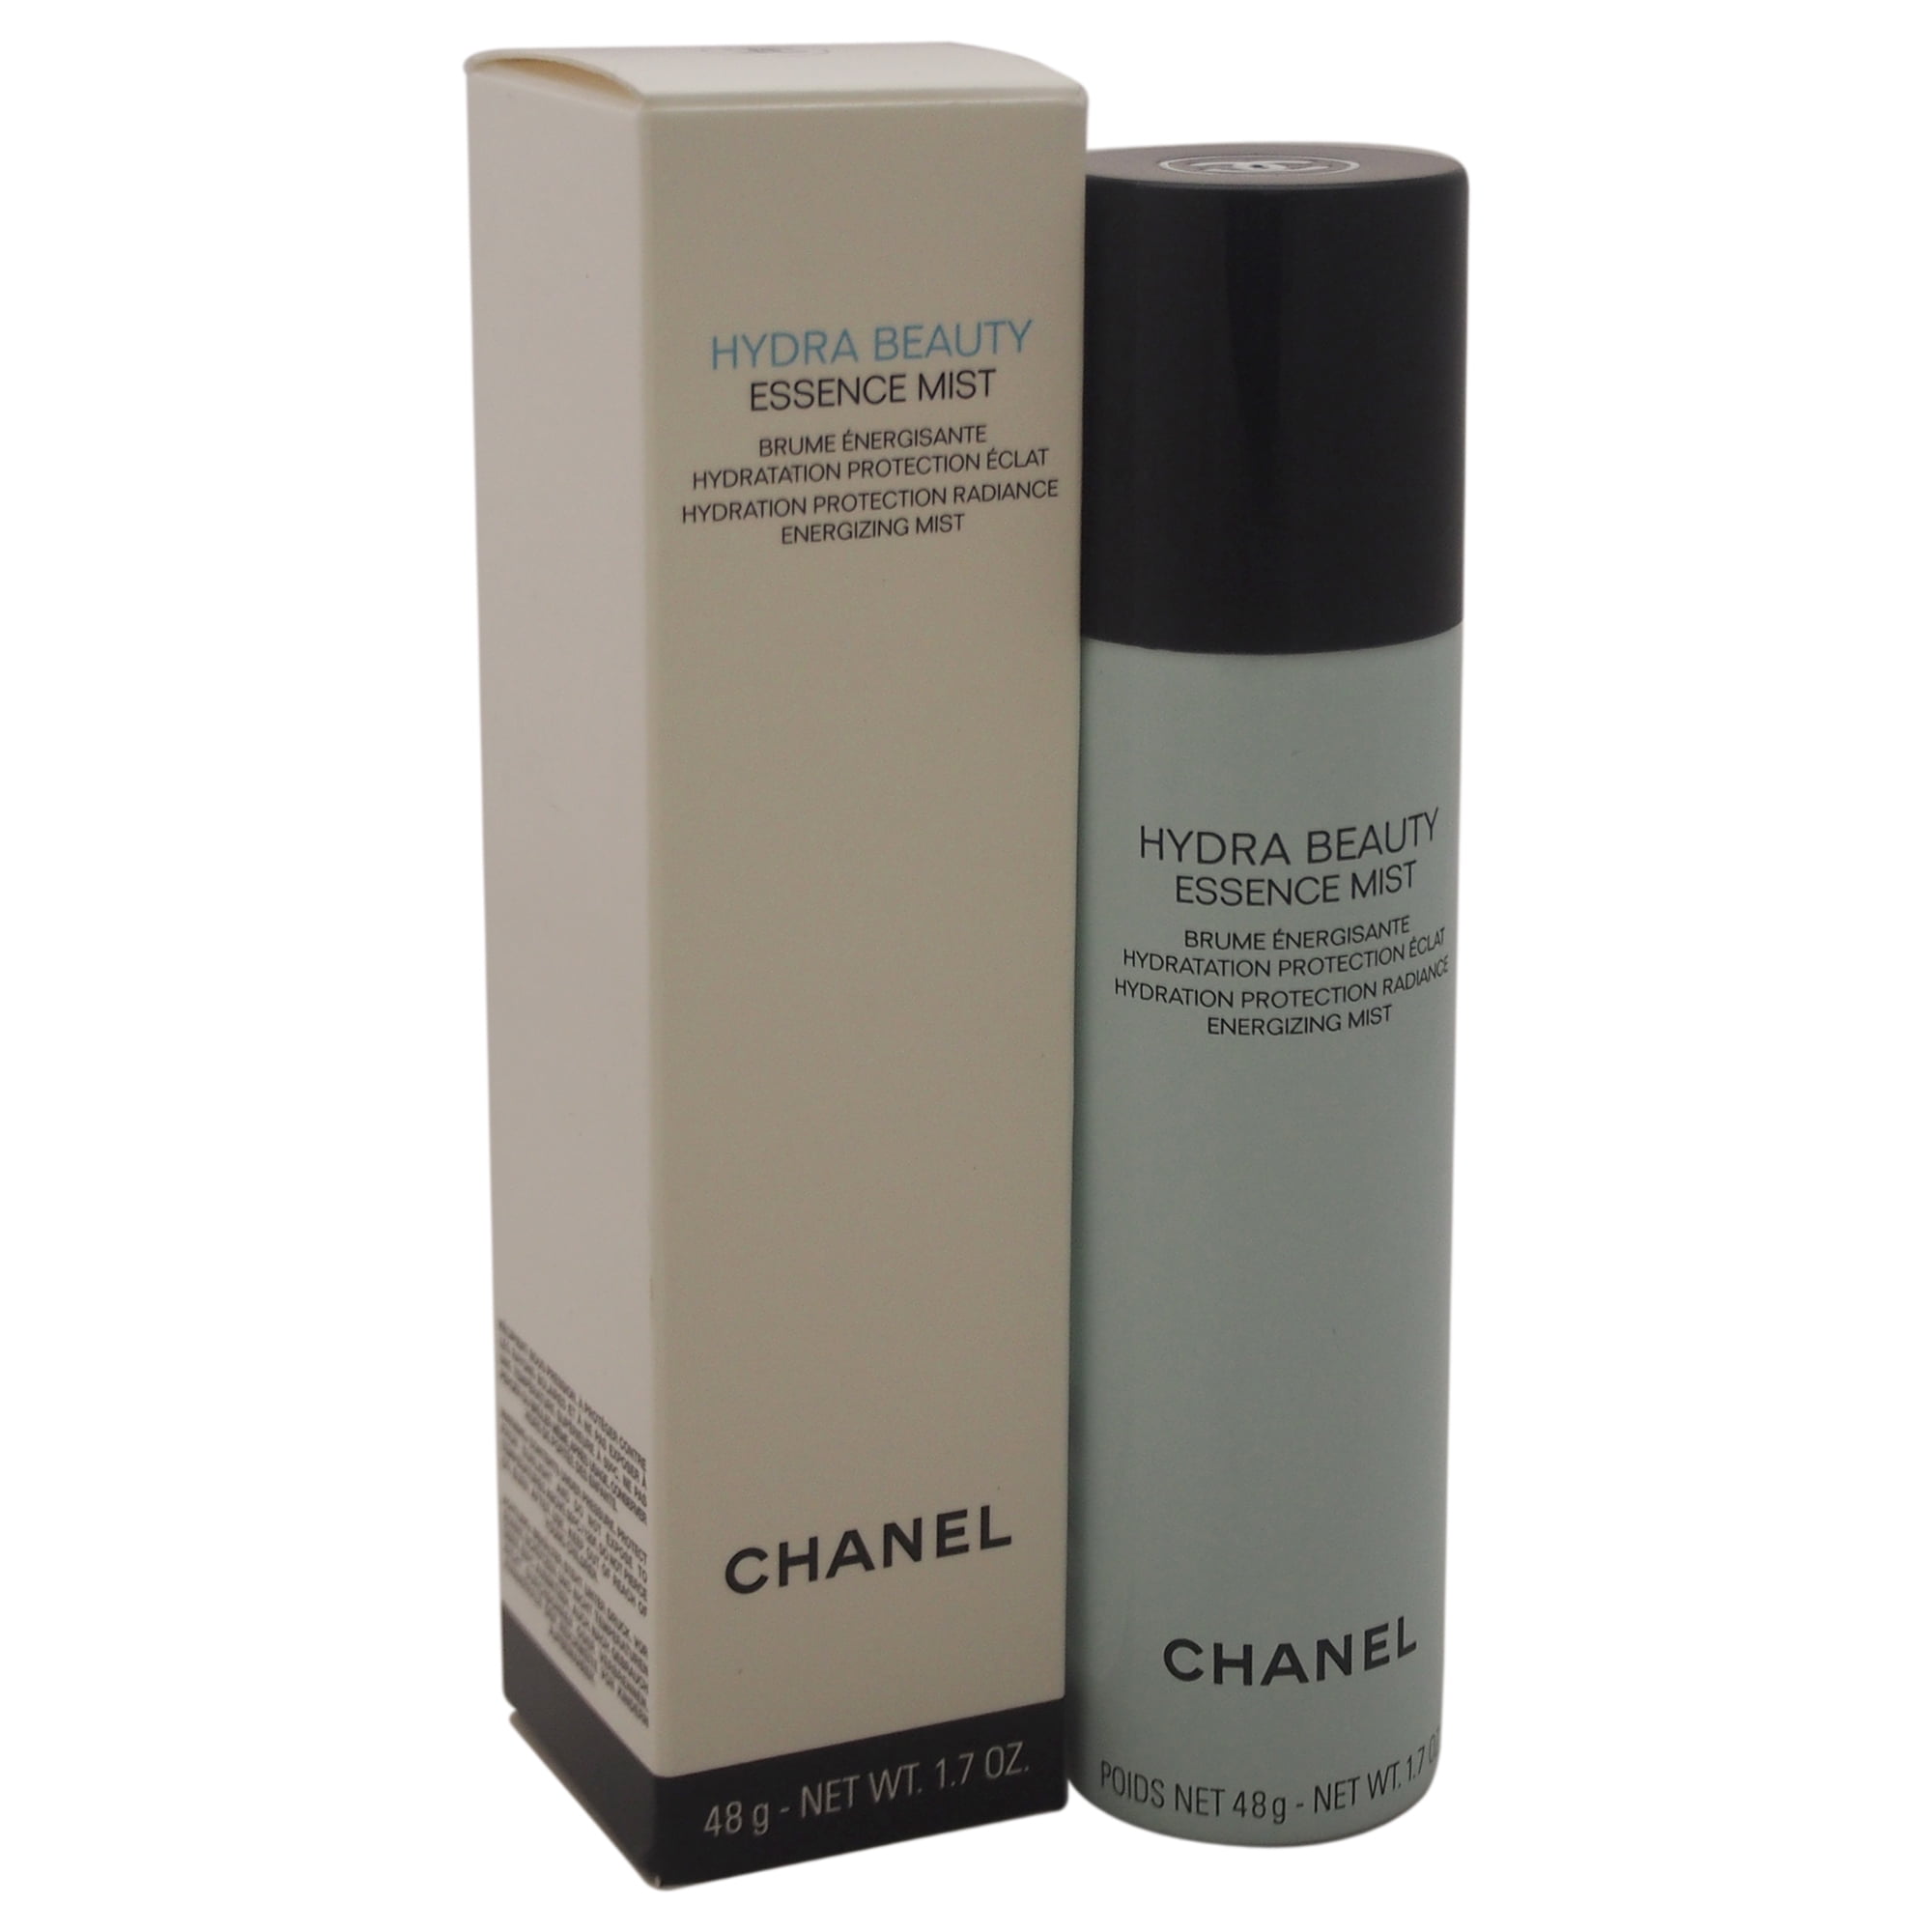 Hydra Beauty Essence Mist Hydration Protection Radiance Energizing Mist by  Chanel for Unisex  o 